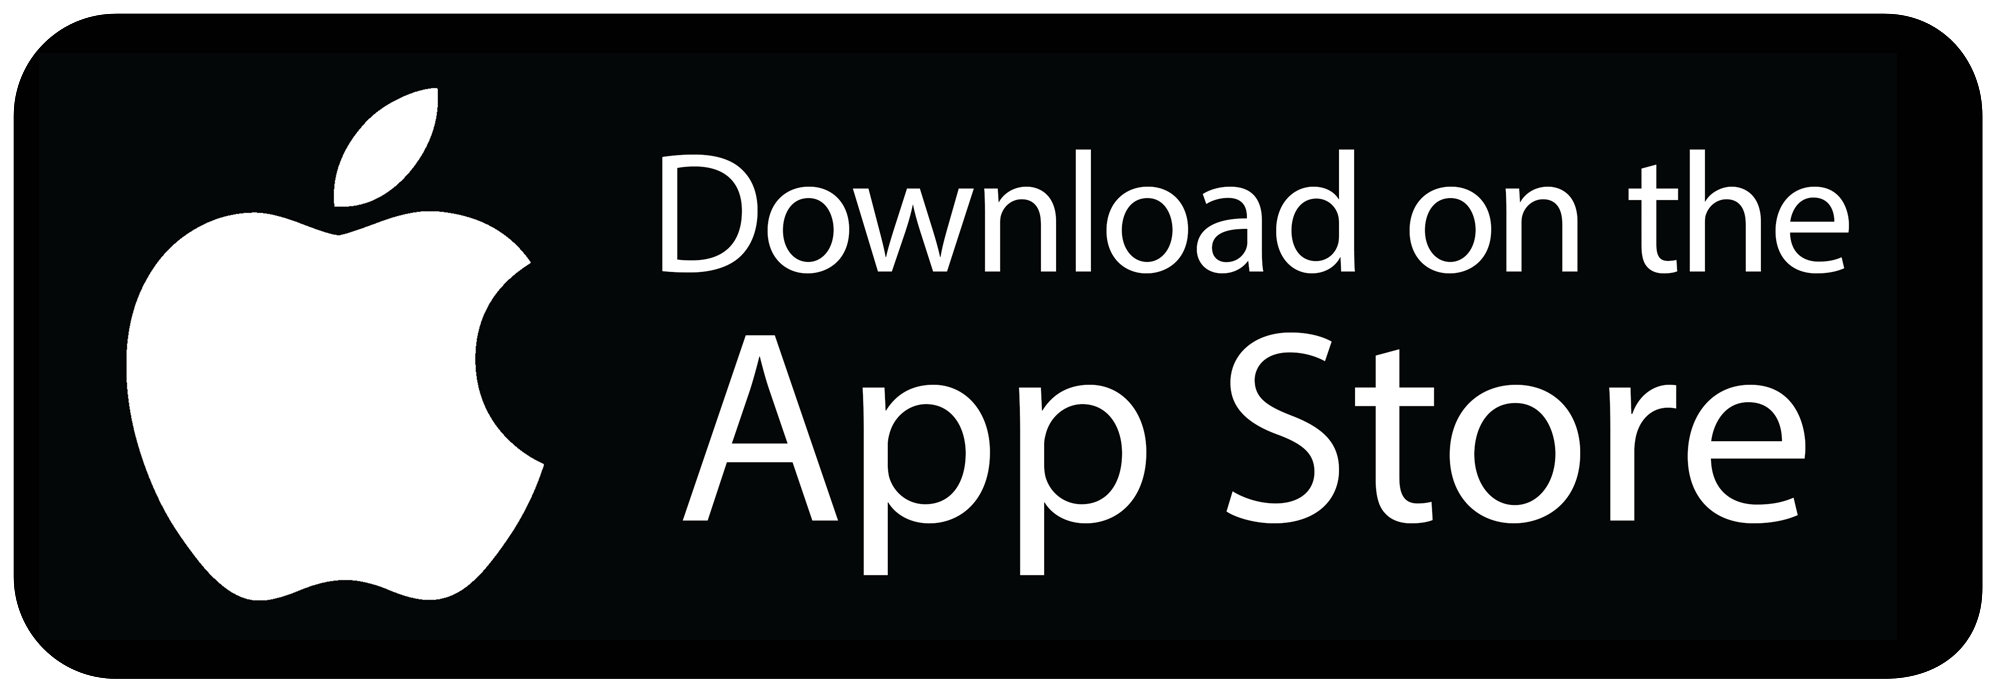 download-on-app-store-png